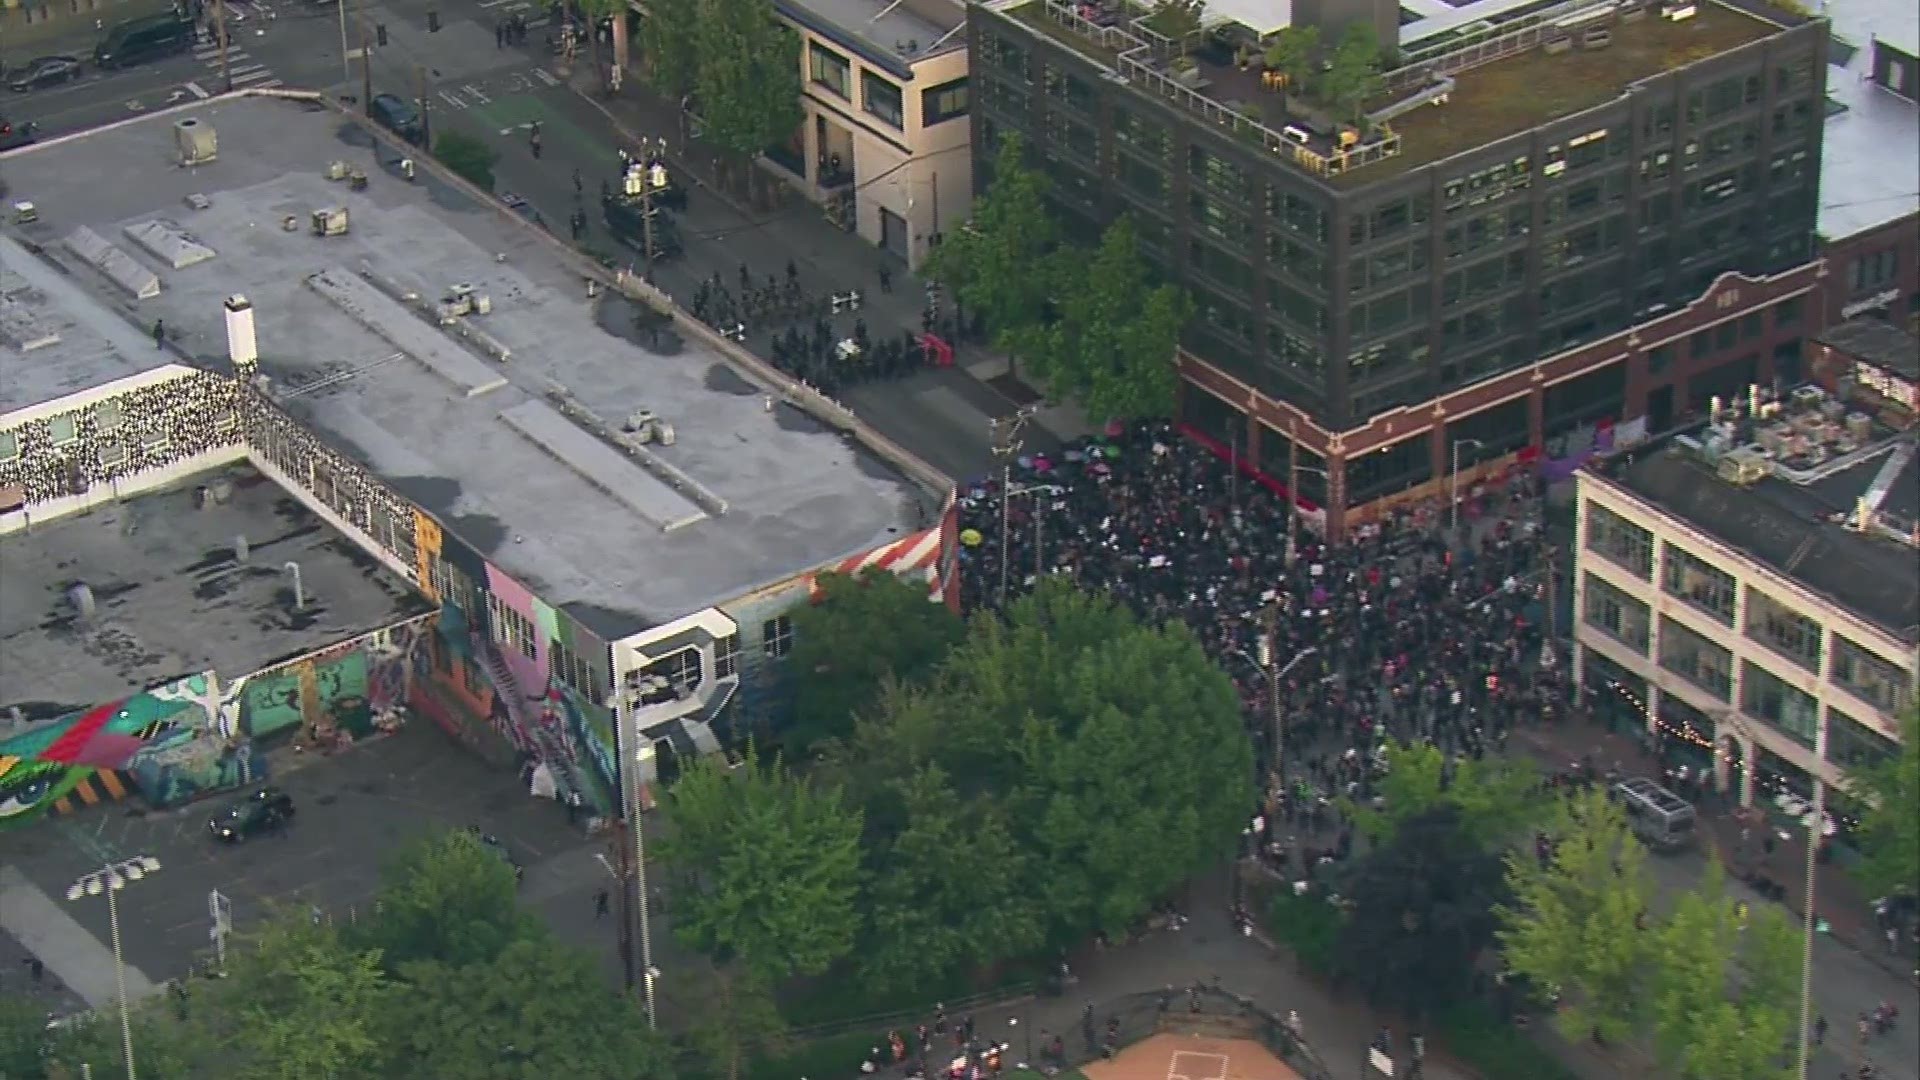 A man was shot after a car ran through a crowd during a protest in Seattle on June 7, 2020.